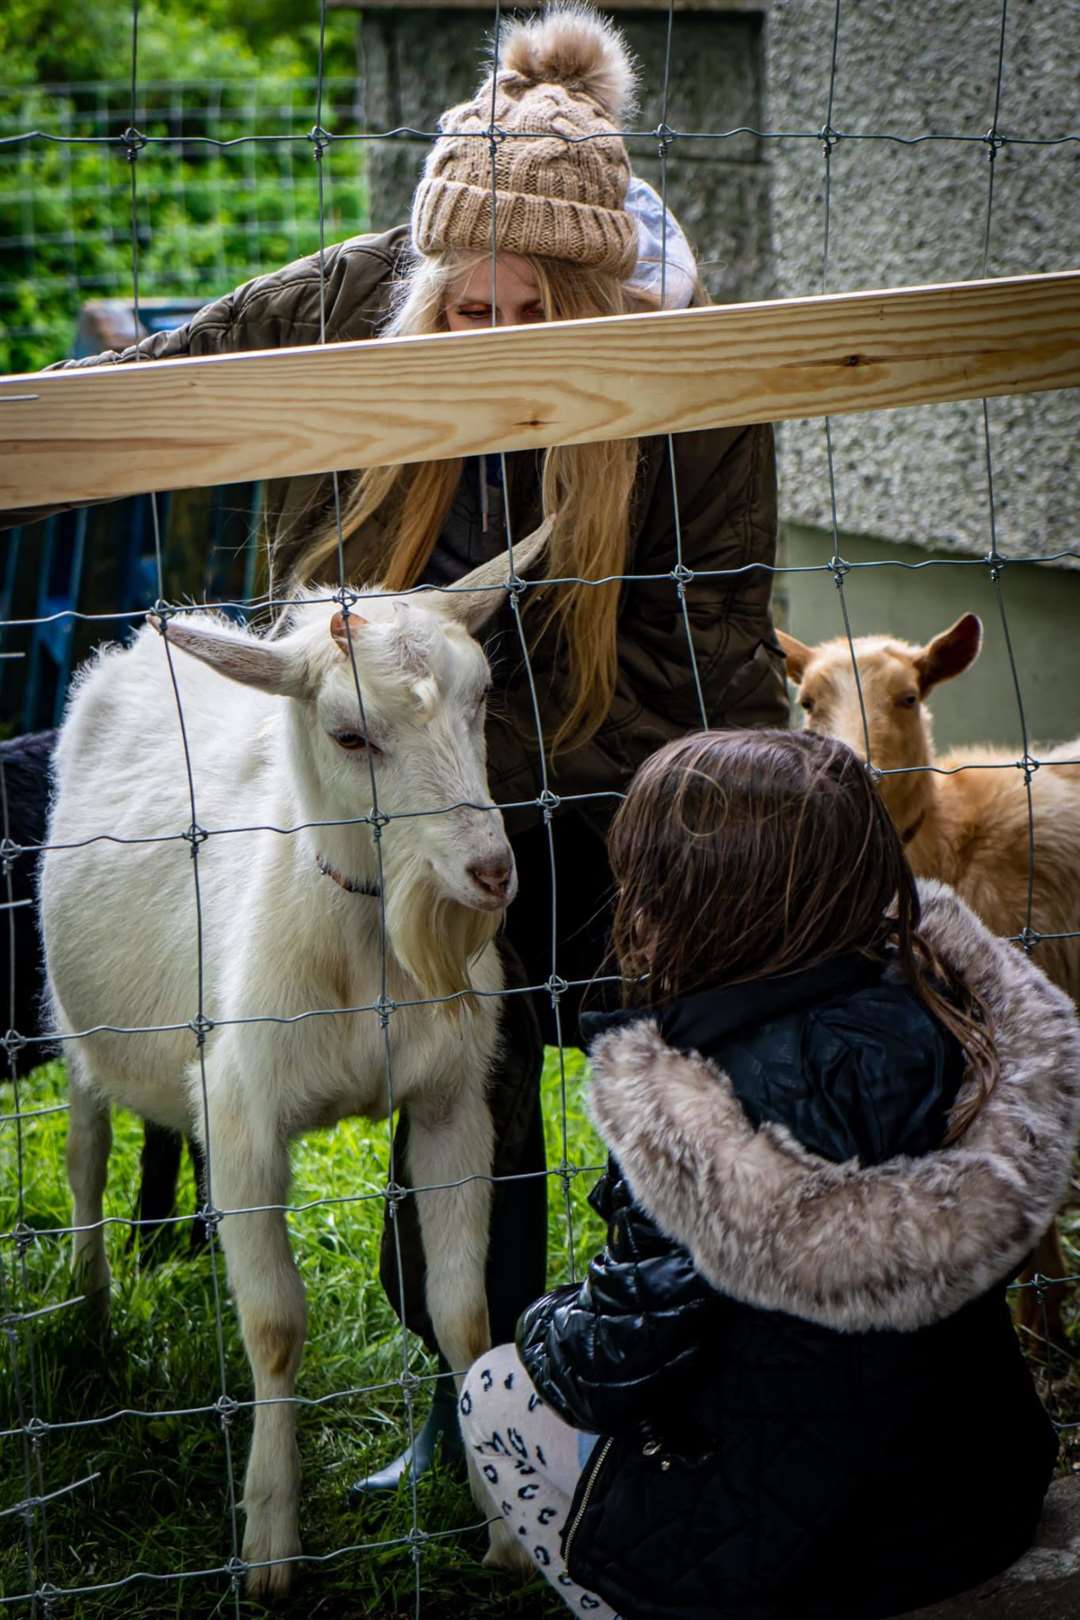 The goats proved popular with the younger visitors. Picture: Richard Lawrence